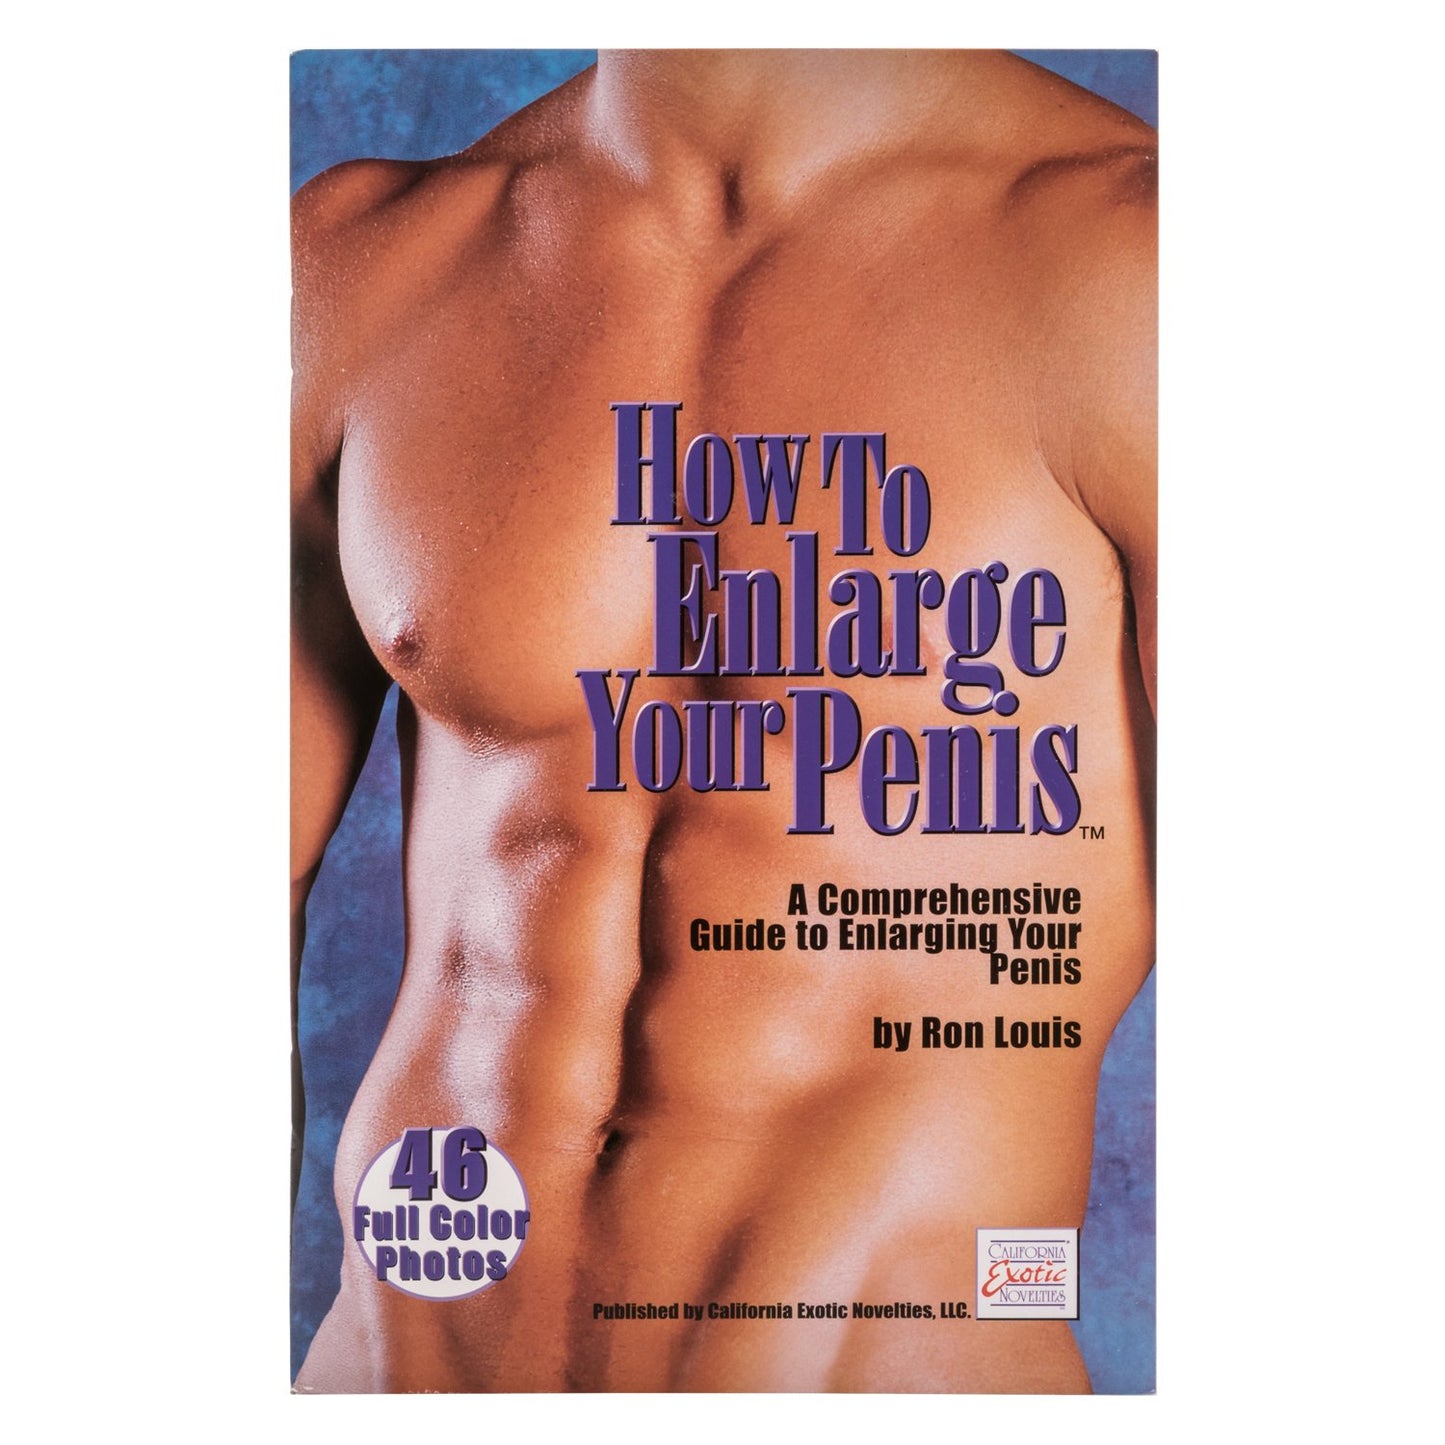 How to Enlarge Your Penis™